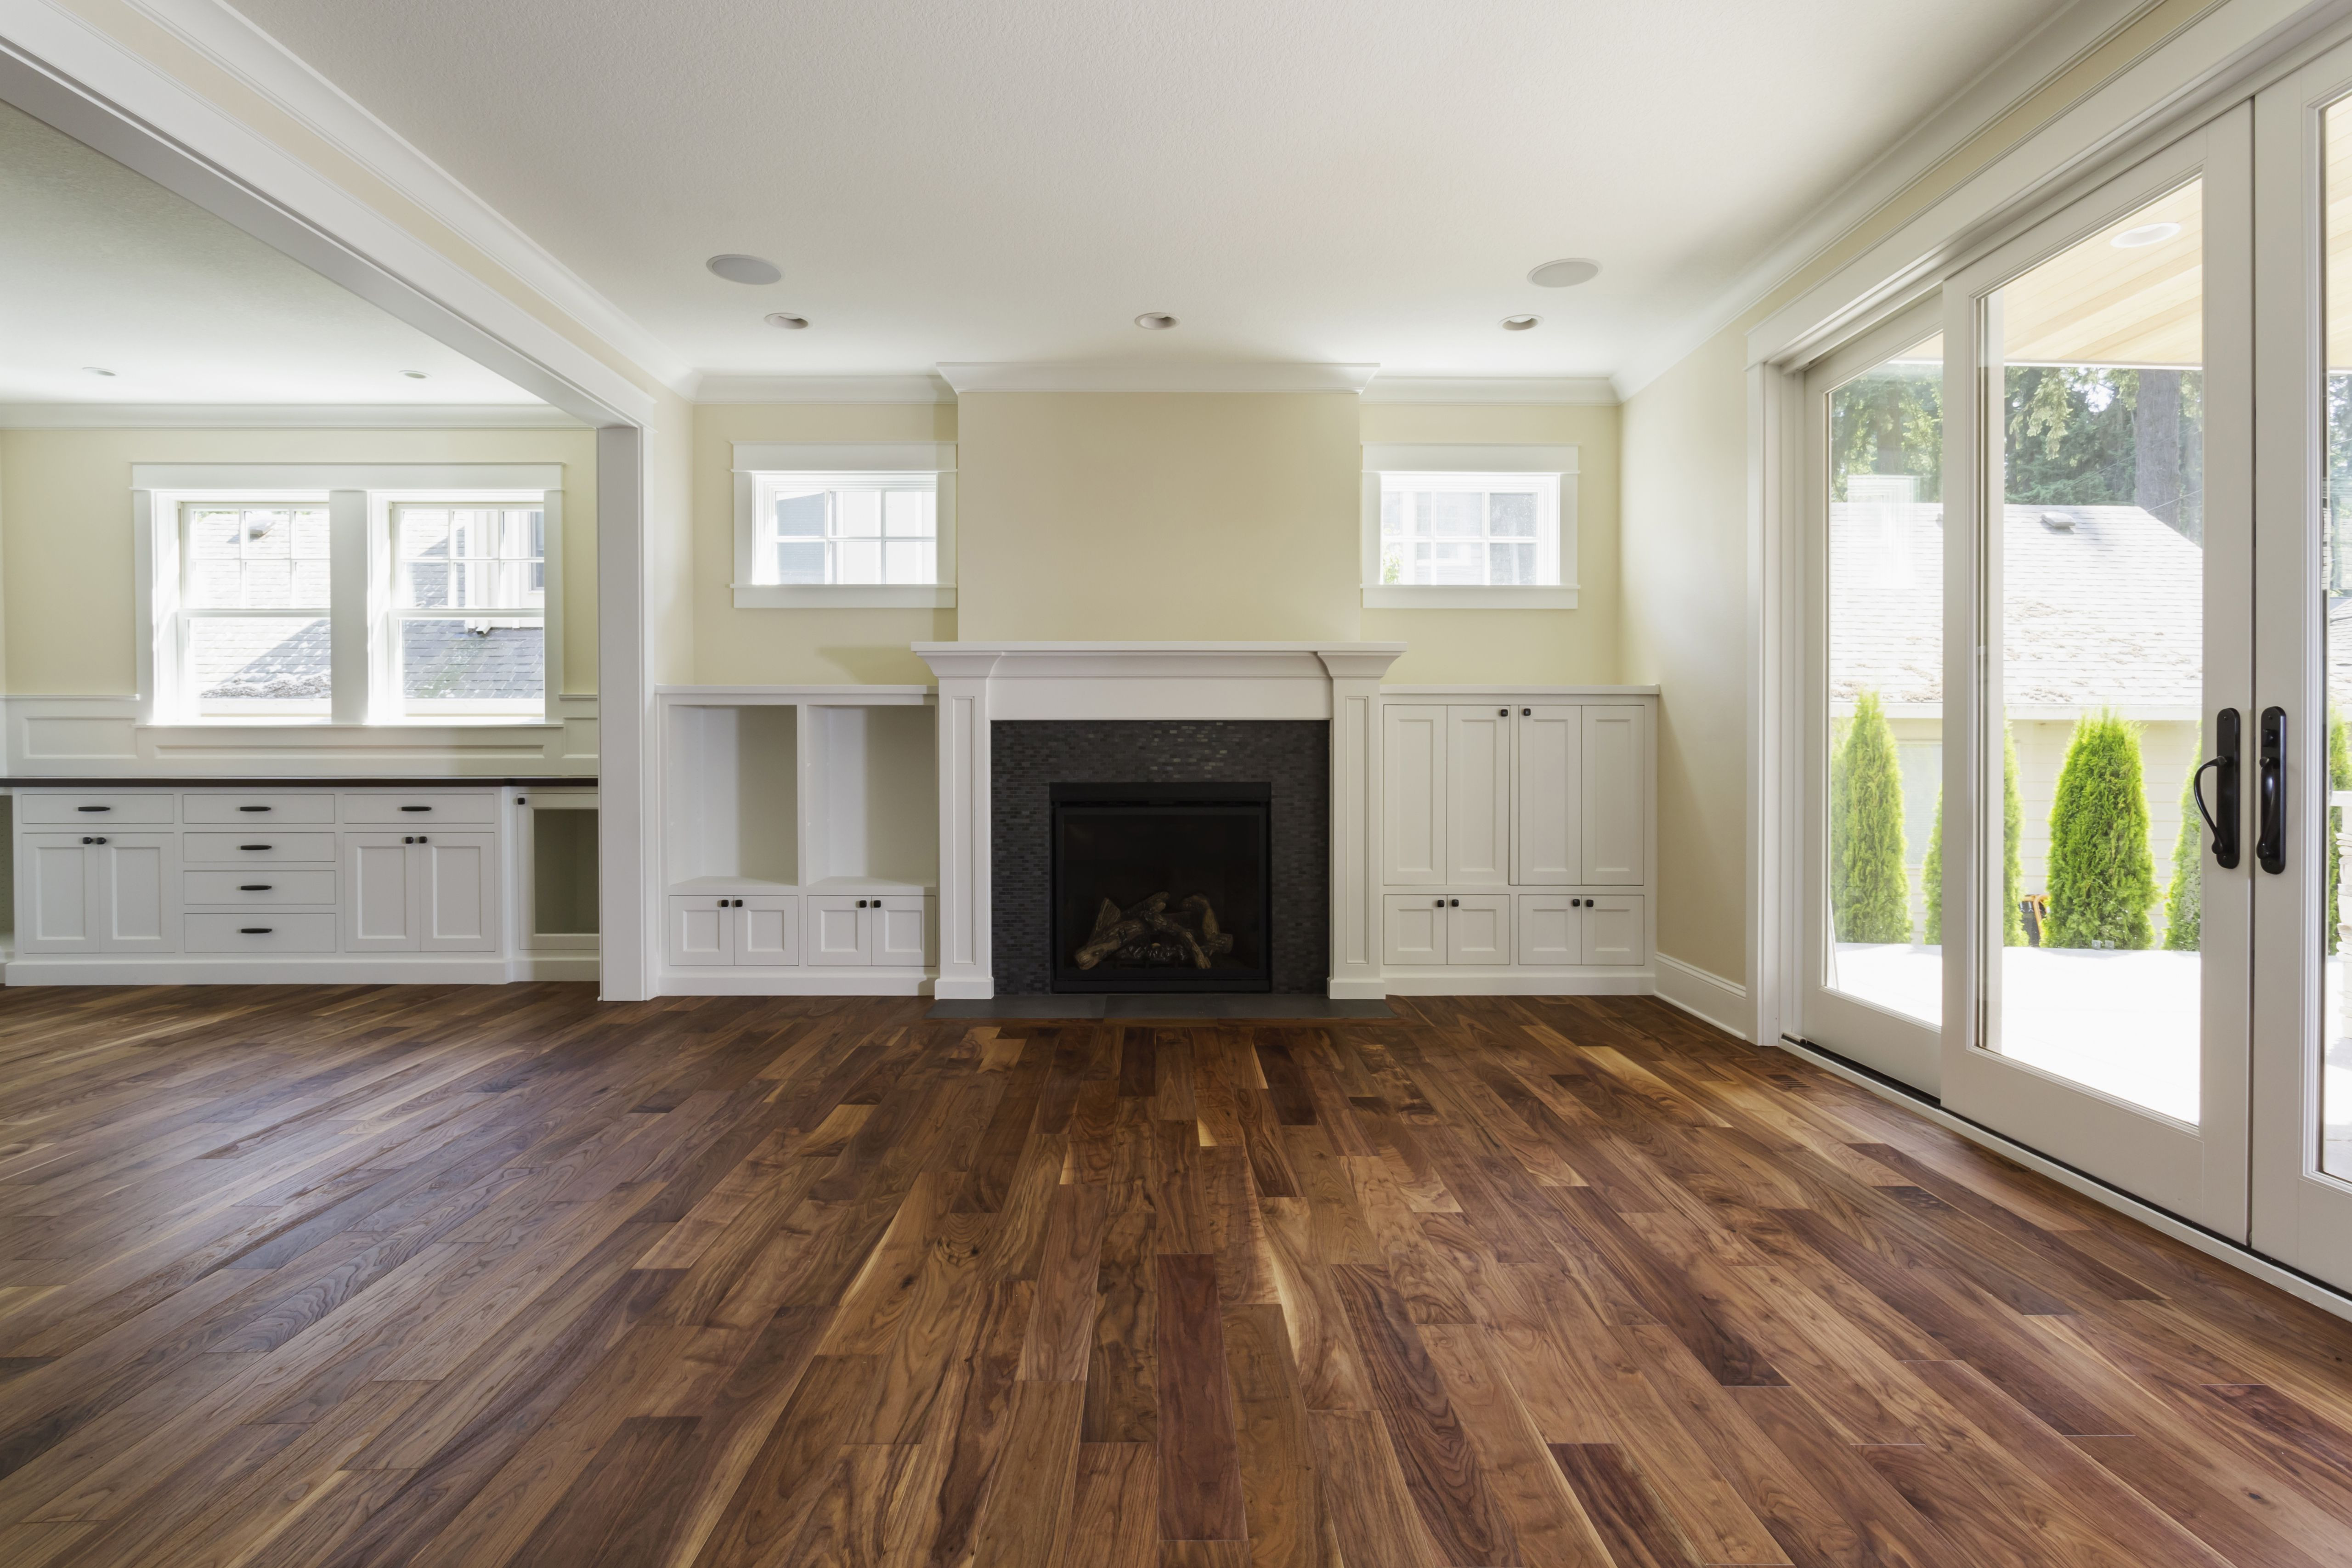 hardwood floor living room ideas of the pros and cons of prefinished hardwood flooring with fireplace and built in shelves in living room 482143011 57bef8e33df78cc16e035397